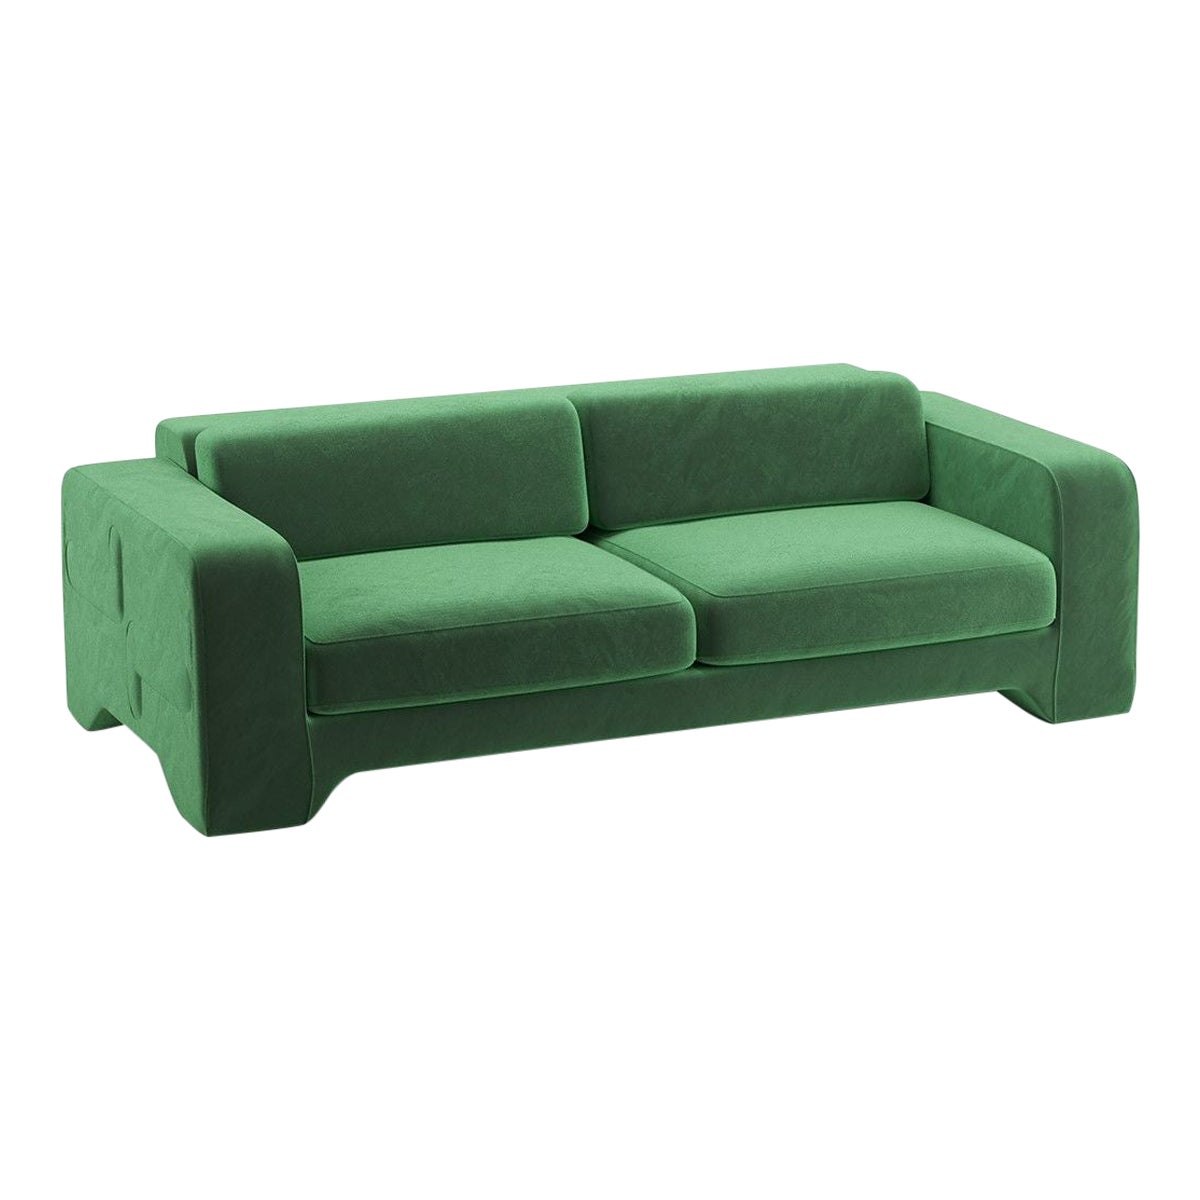 Popus Editions Giovanna 4 Seater Sofa in Green (771727) Como Velvet Upholstery For Sale